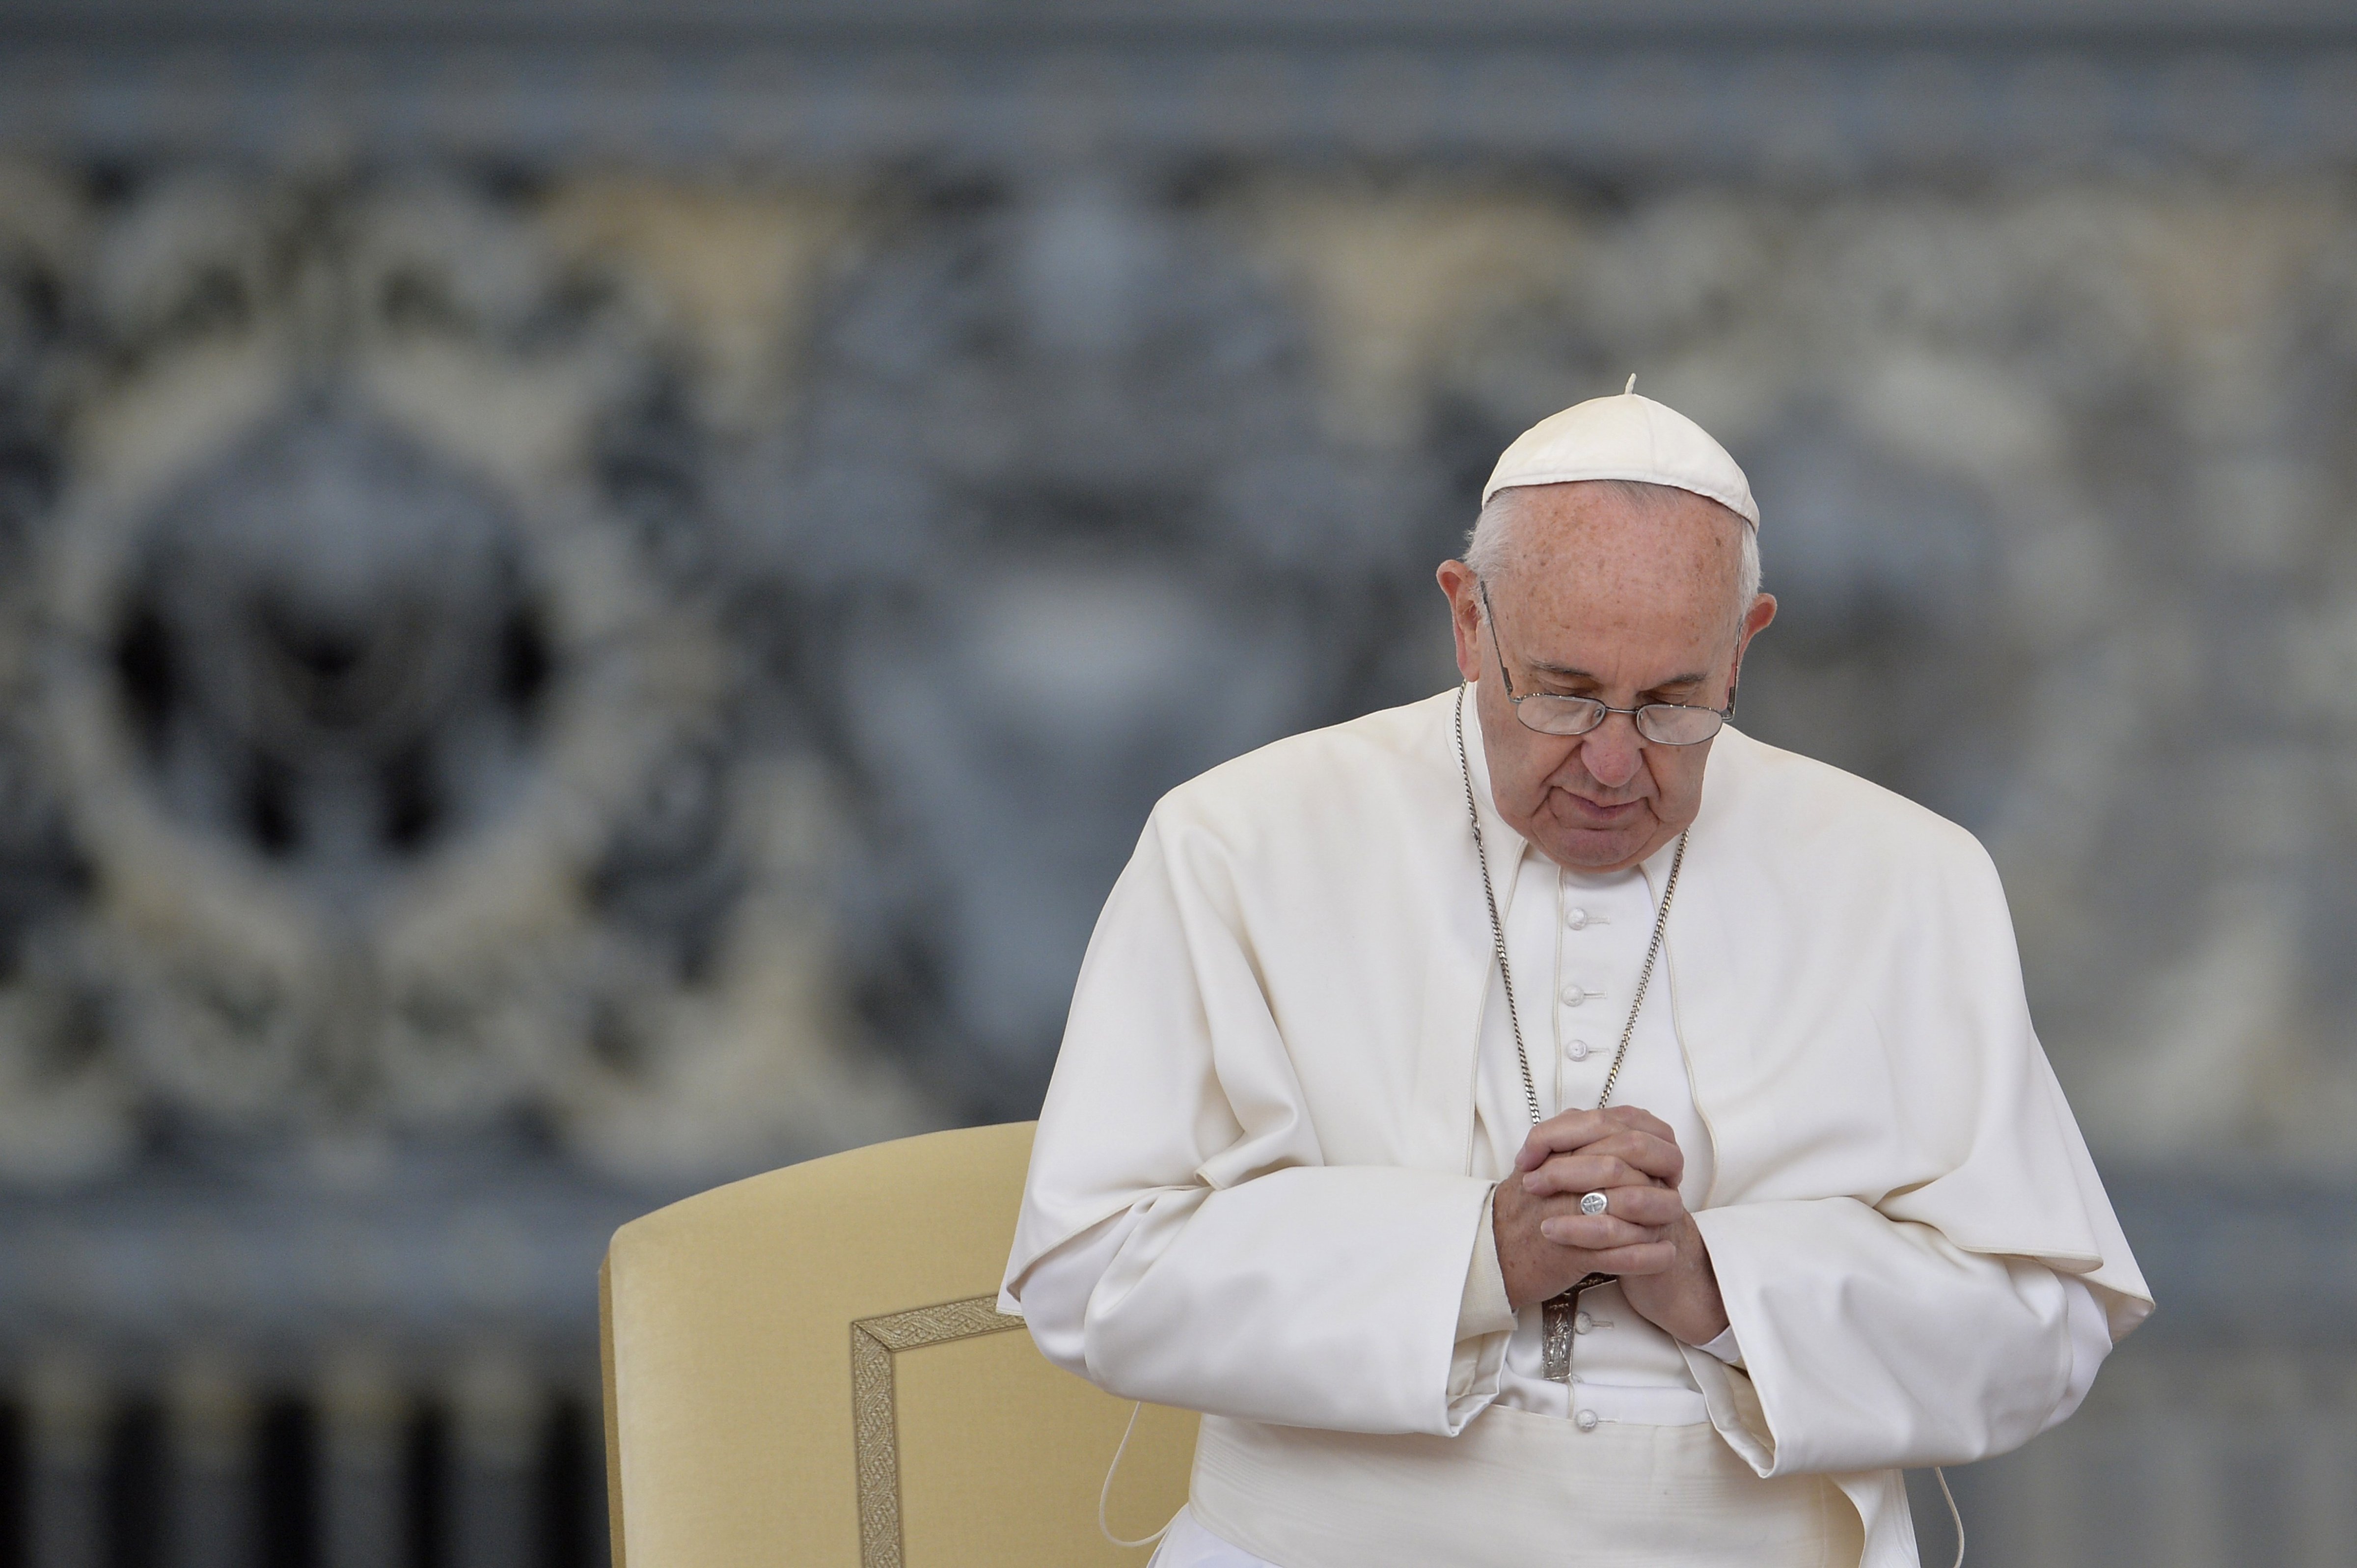 Pope Francis prays during his weekly general audience at St Peter's square on Sept. 30, 2015 at the Vatican. (Andreas Solaro—AFP/Getty Images)